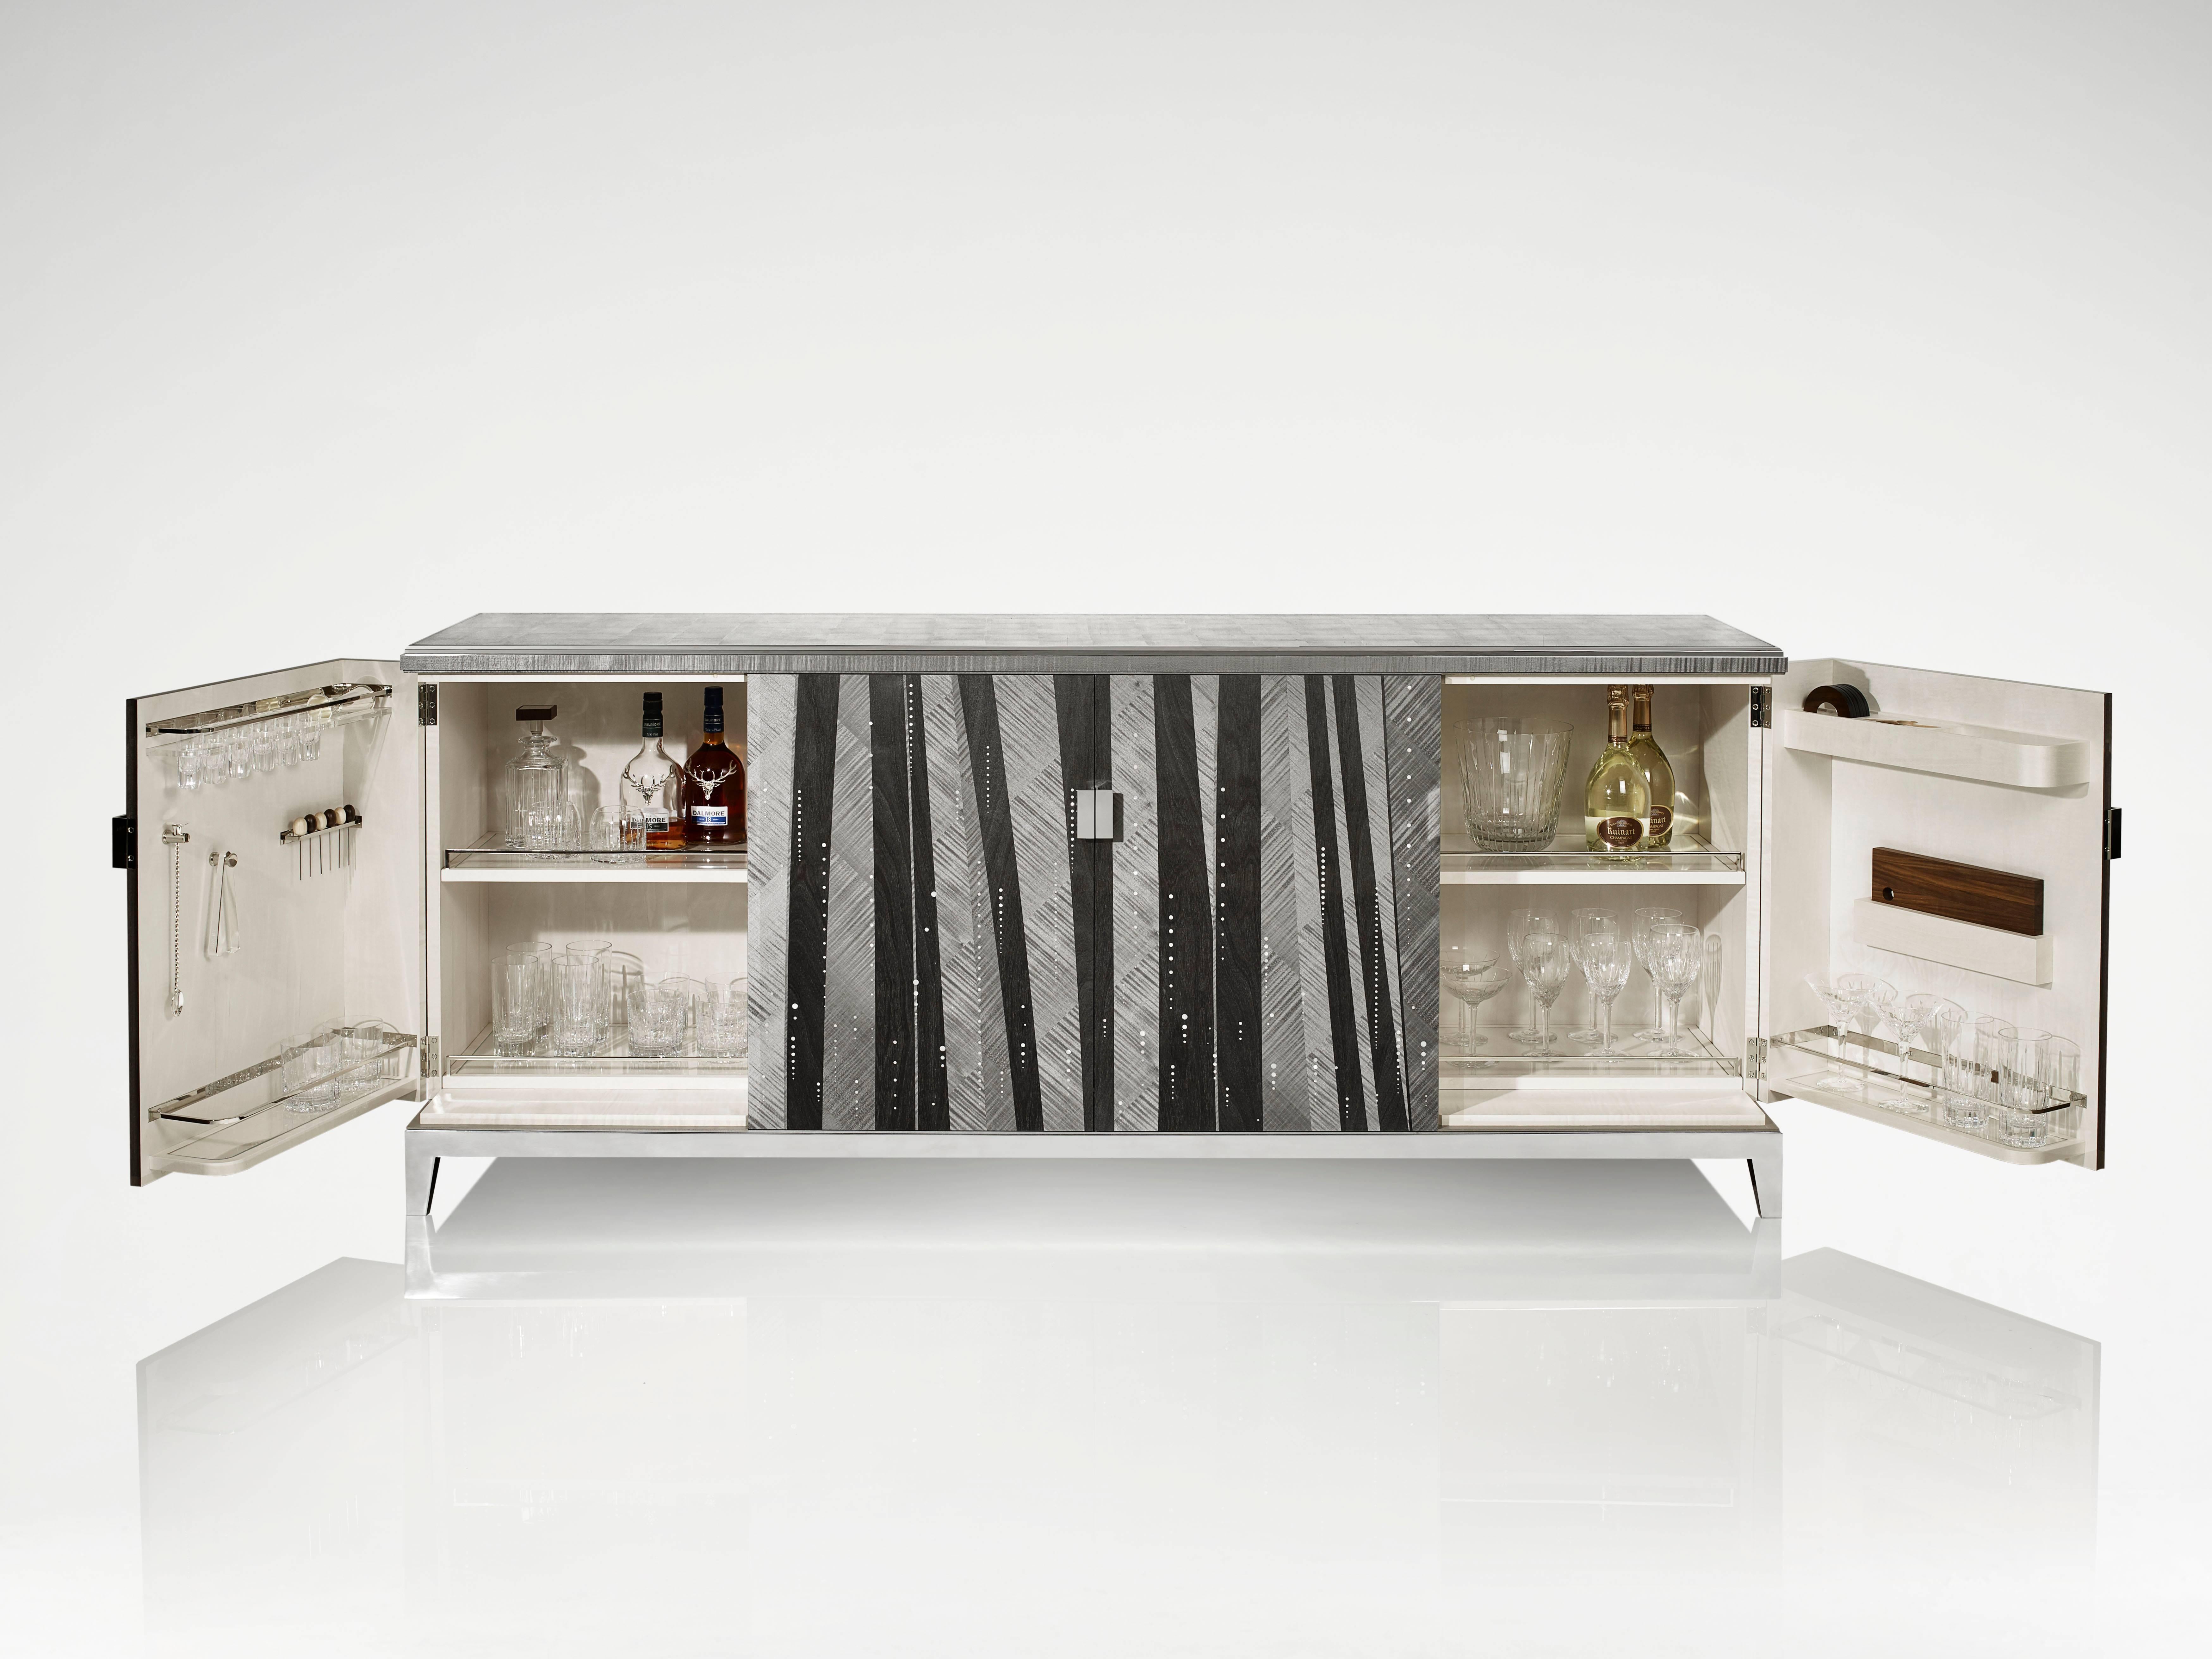 Inspired by our popular Trafalgar cocktail box, this elegant cocktail cabinet has been handcrafted in hand-dyed charcoal veneers of ripple and straight sycamore. The eglomisé surface has a nickel trim and is highlighted with mother-of-pearl